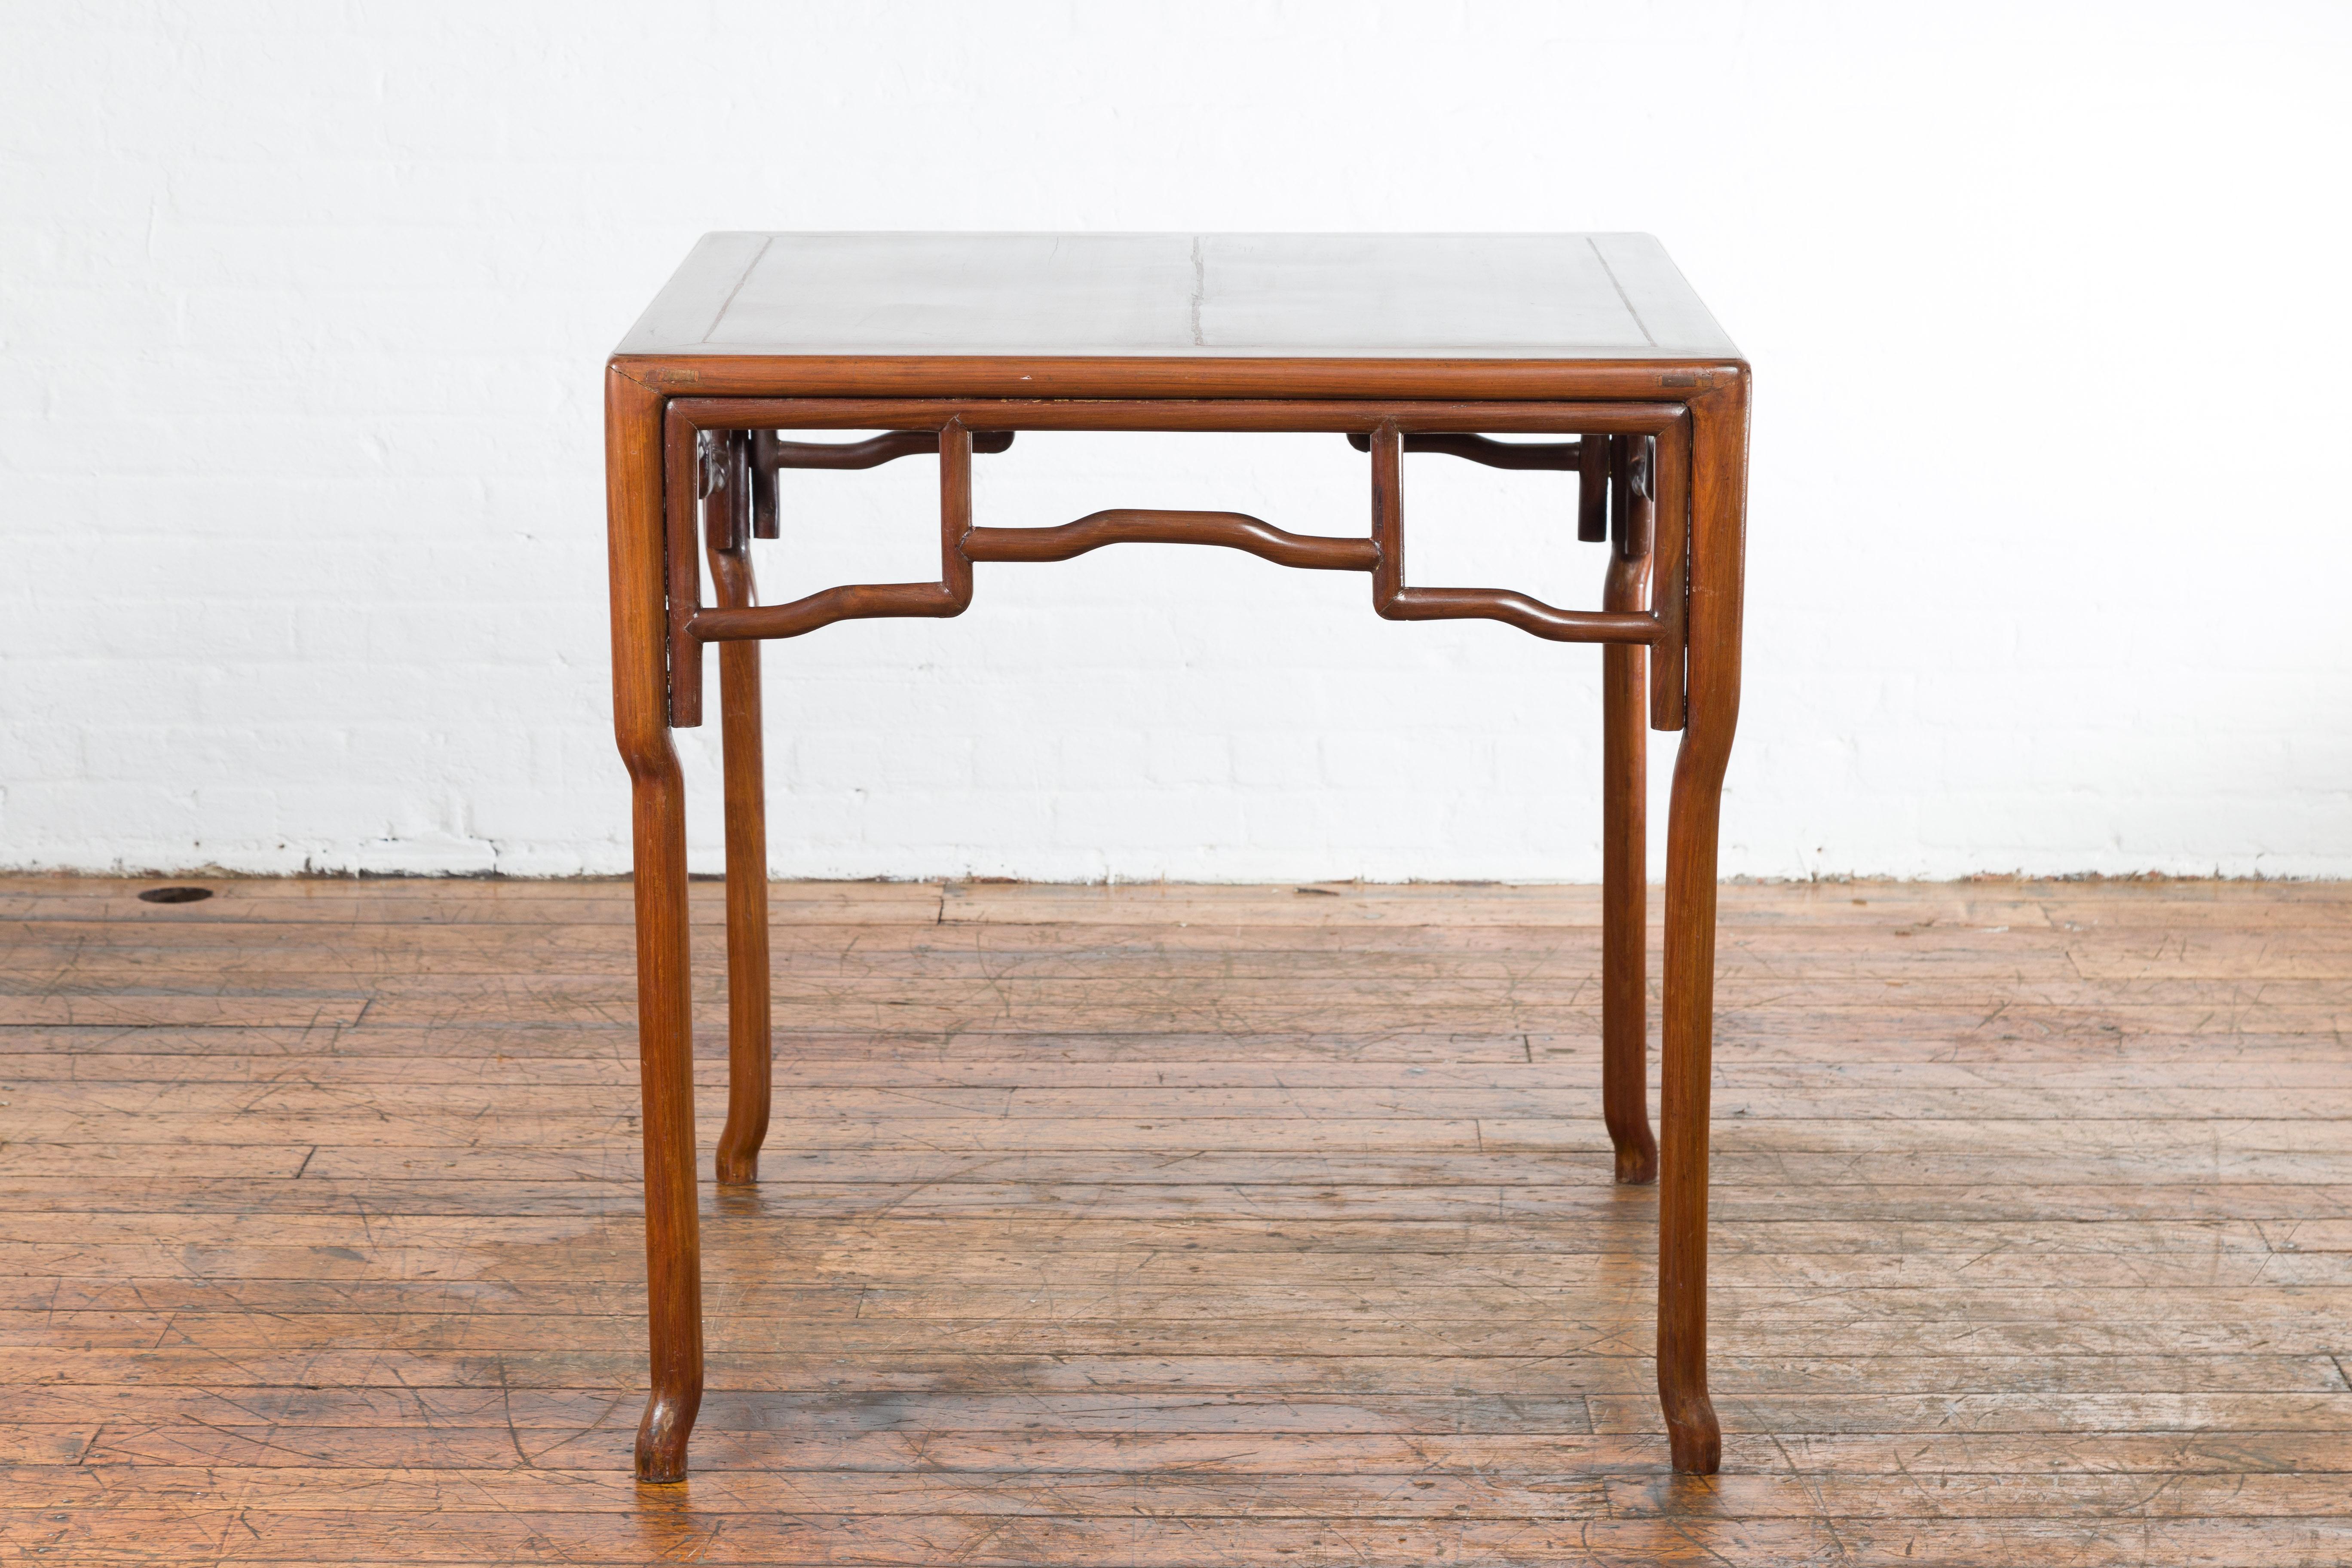 A Chinese Qing Dynasty period square top wooden game table from the 19th century with openwork apron and curving legs. Created in China during the Qing Dynasty, this game table features a square top with central board, sitting above an elegant